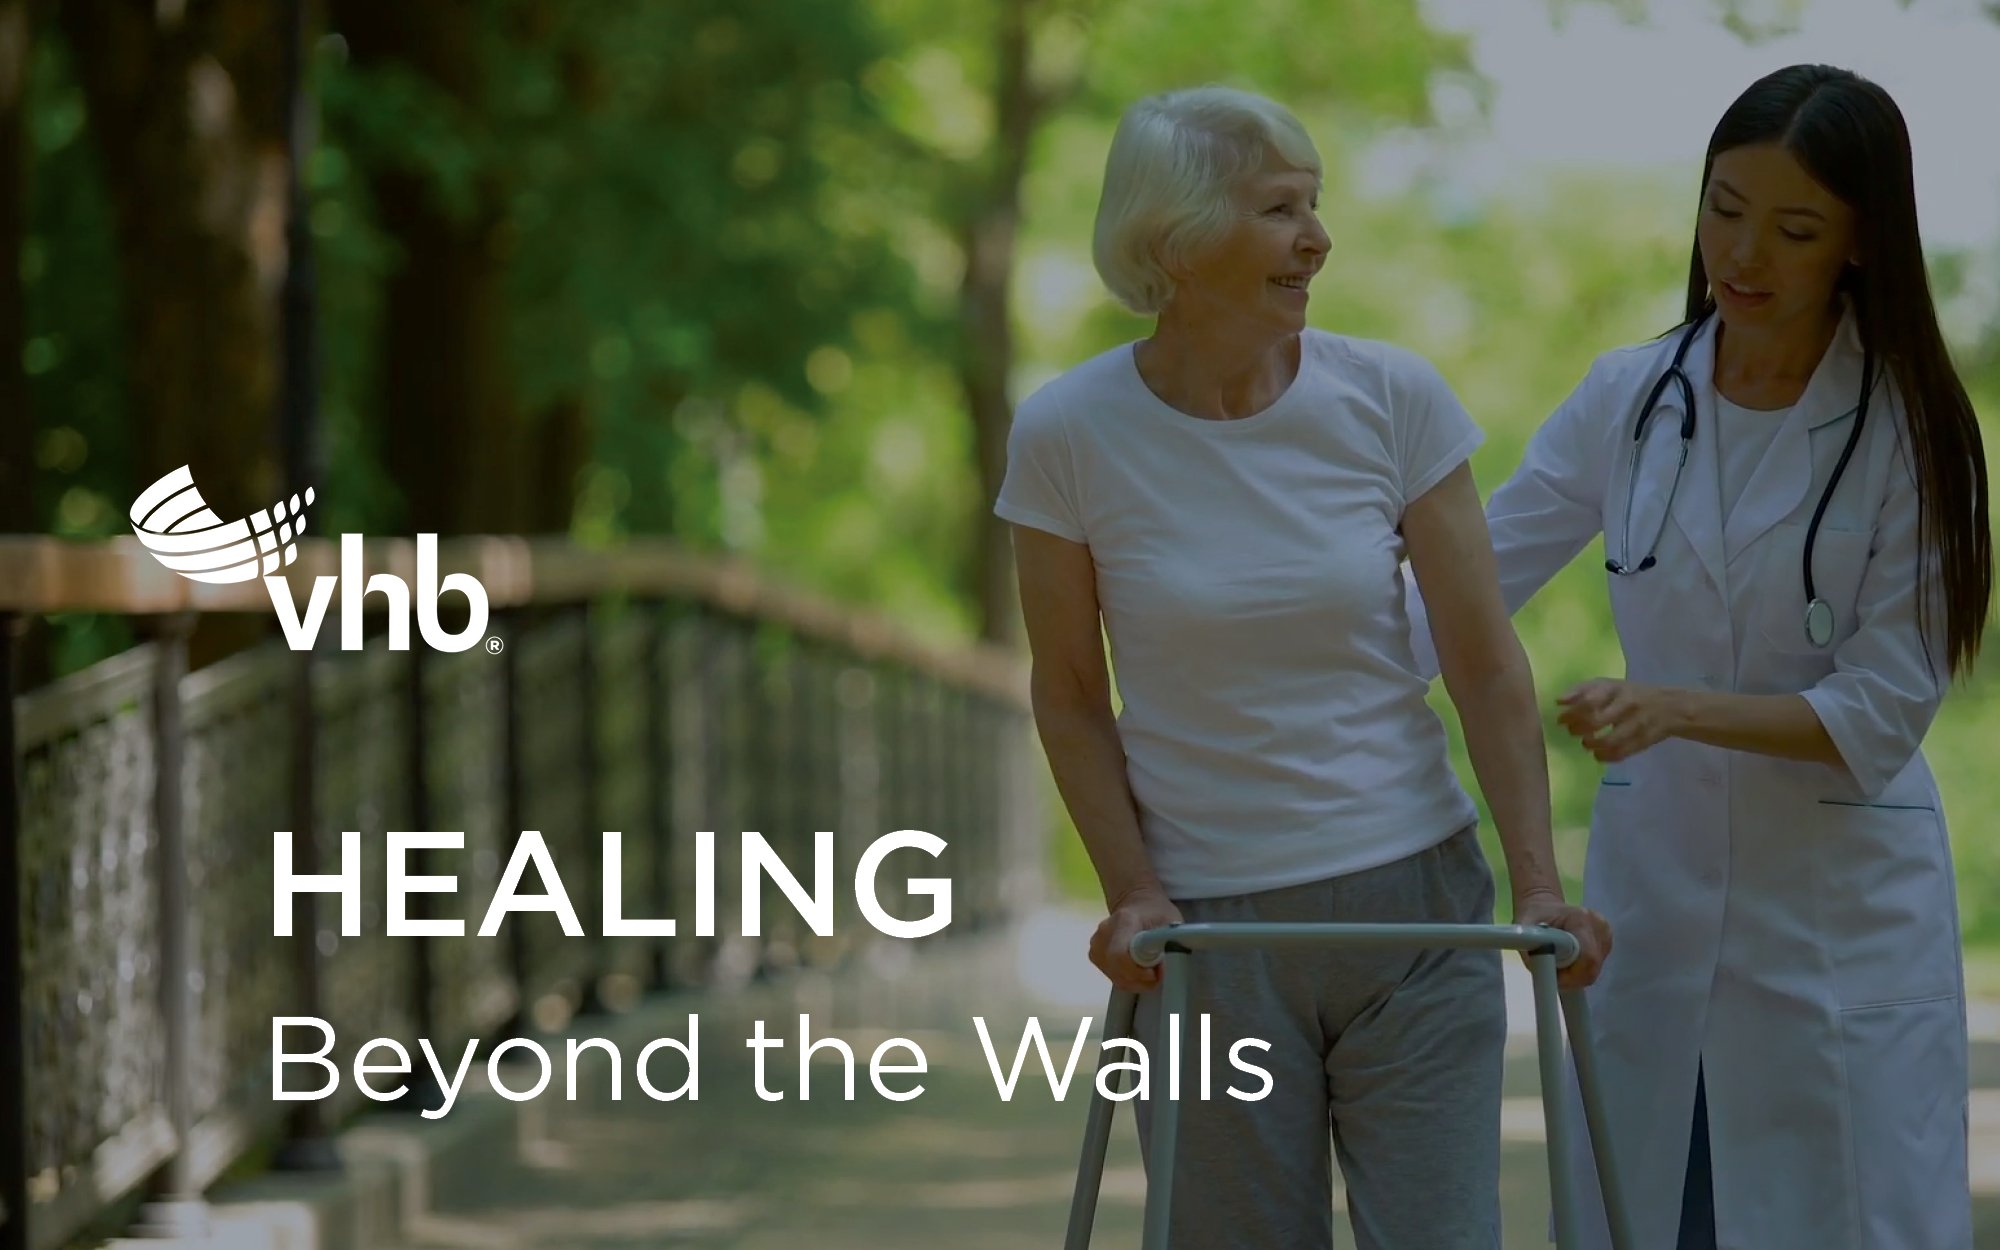 Watch Healing Beyond the Walls: Extending the healthcare environment to improve quality of care.